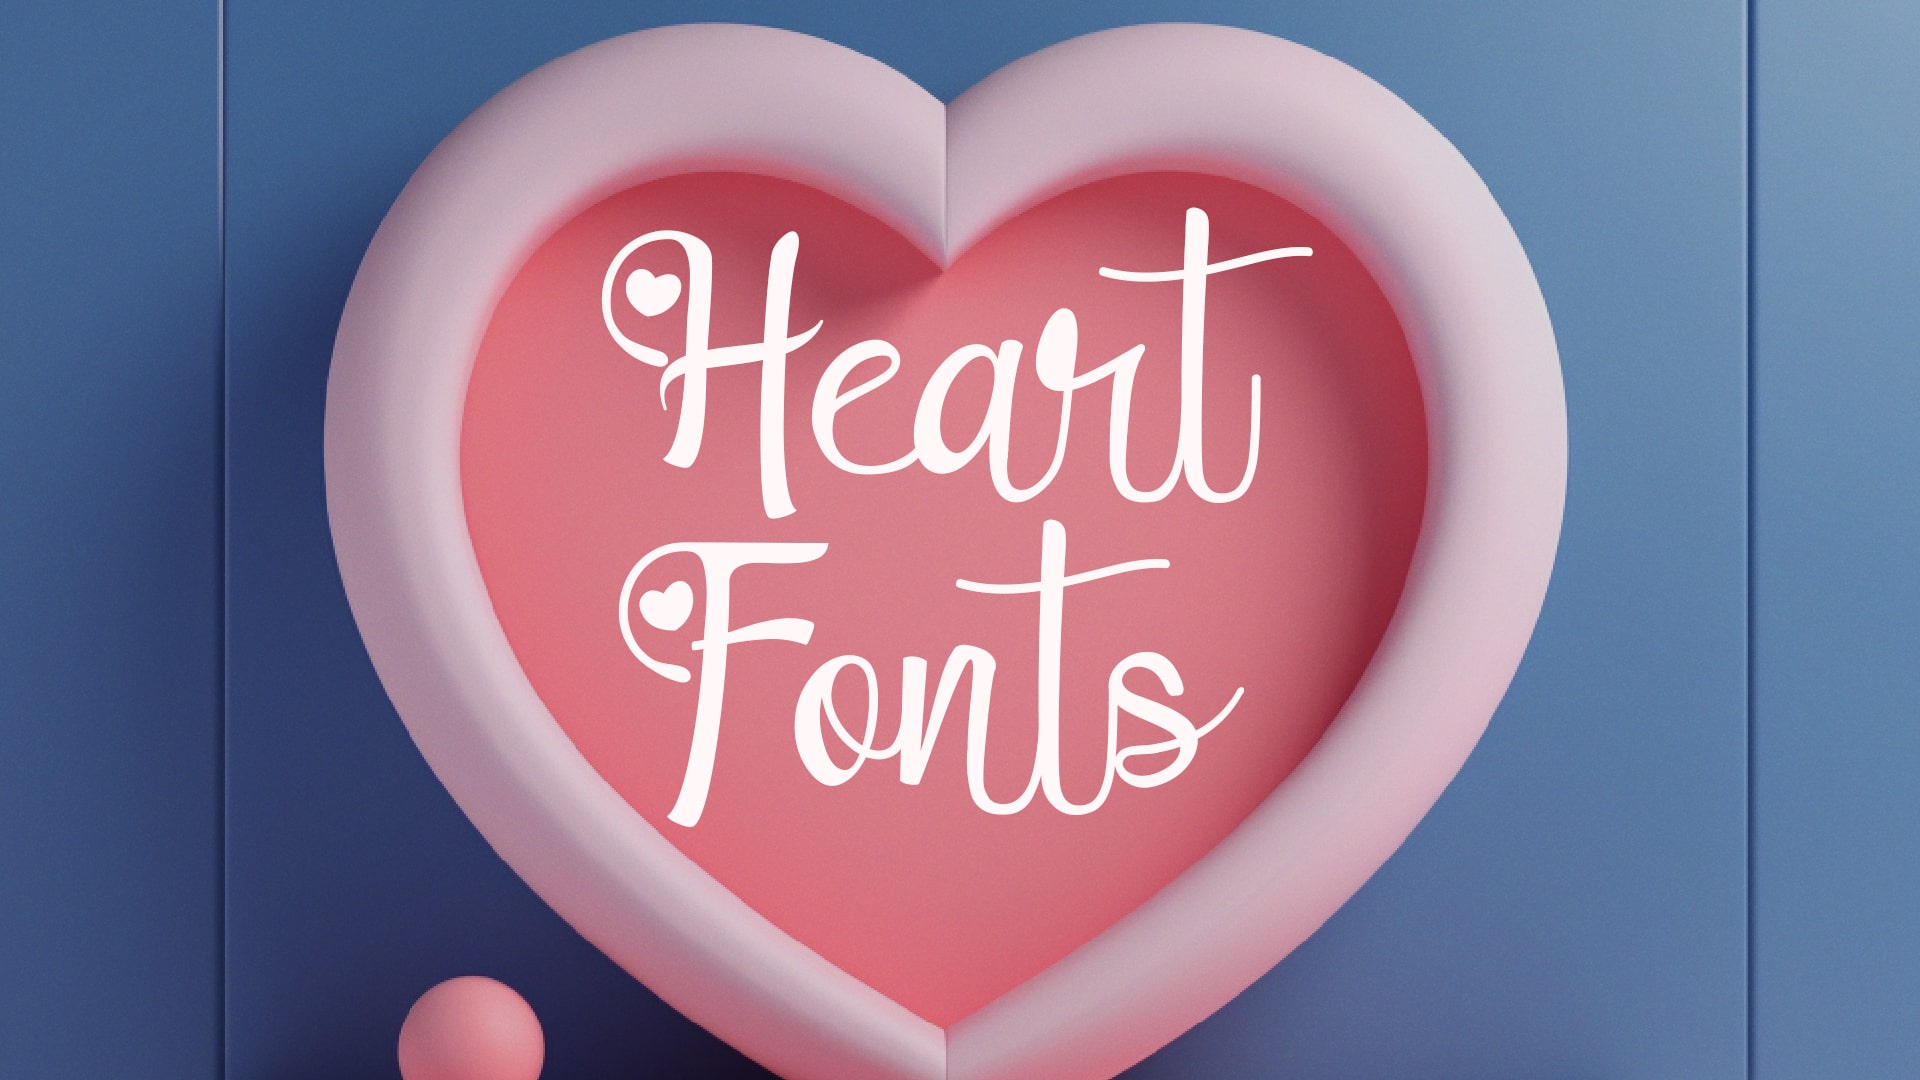 Heart Fonts Cover